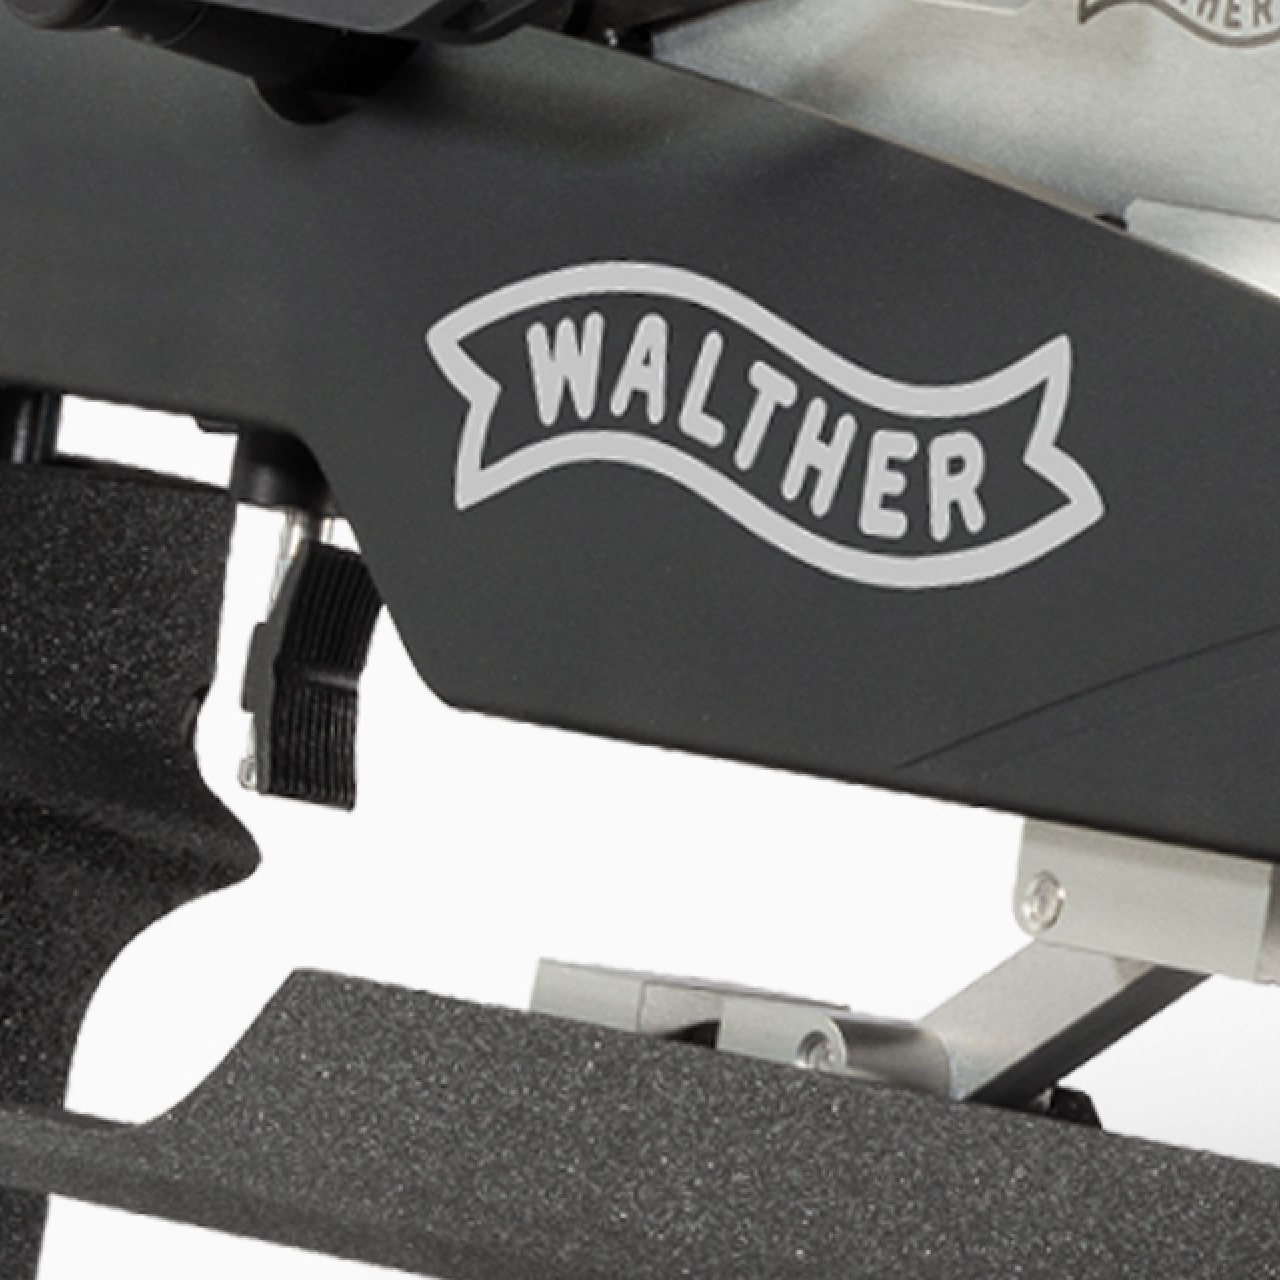 Walther Professional